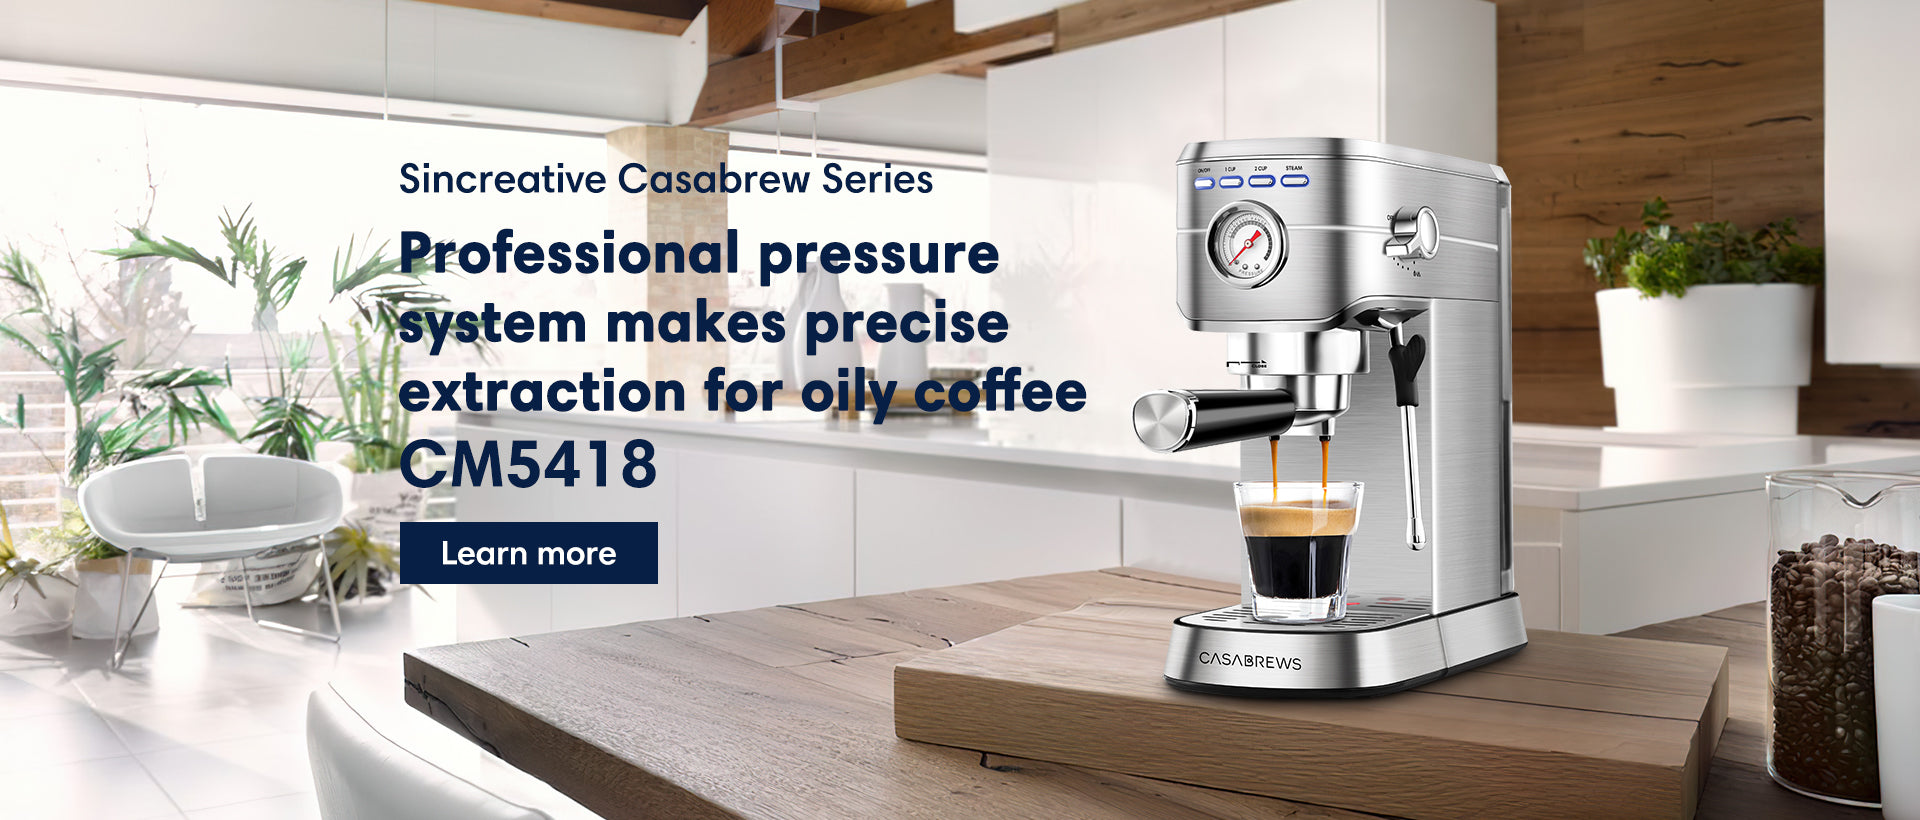 Casabrews slim CM5418 Espresso Machine doesn't skimp on taste! Get all the rich coffee flavor you expect, in an ultra-sleek design. By concentrating its coffee knowhow and expertise into a brand new design, Sincreative has delivered its most functional es